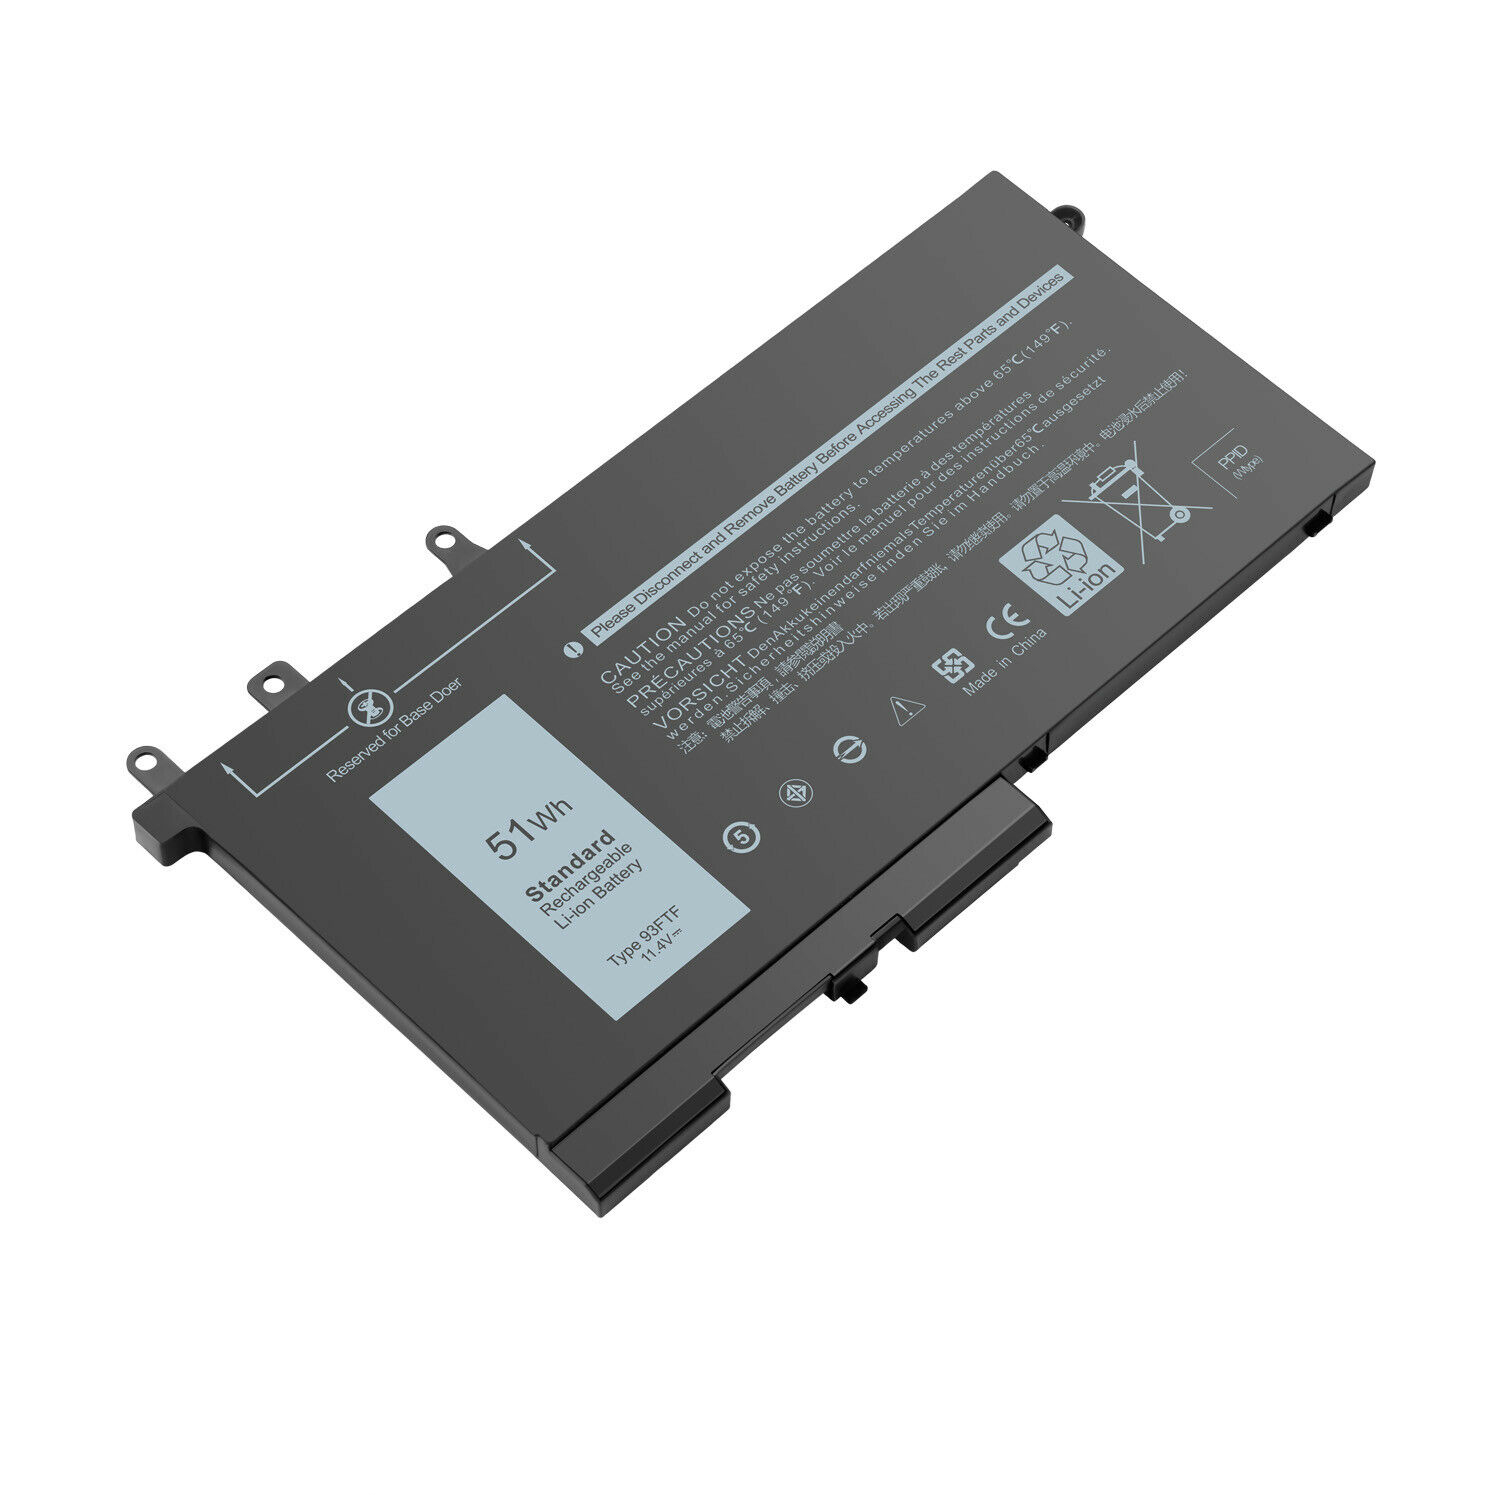 51Wh 93FTF Laptop Battery for Dell Latitude 12 5280 Is Your Best Choise